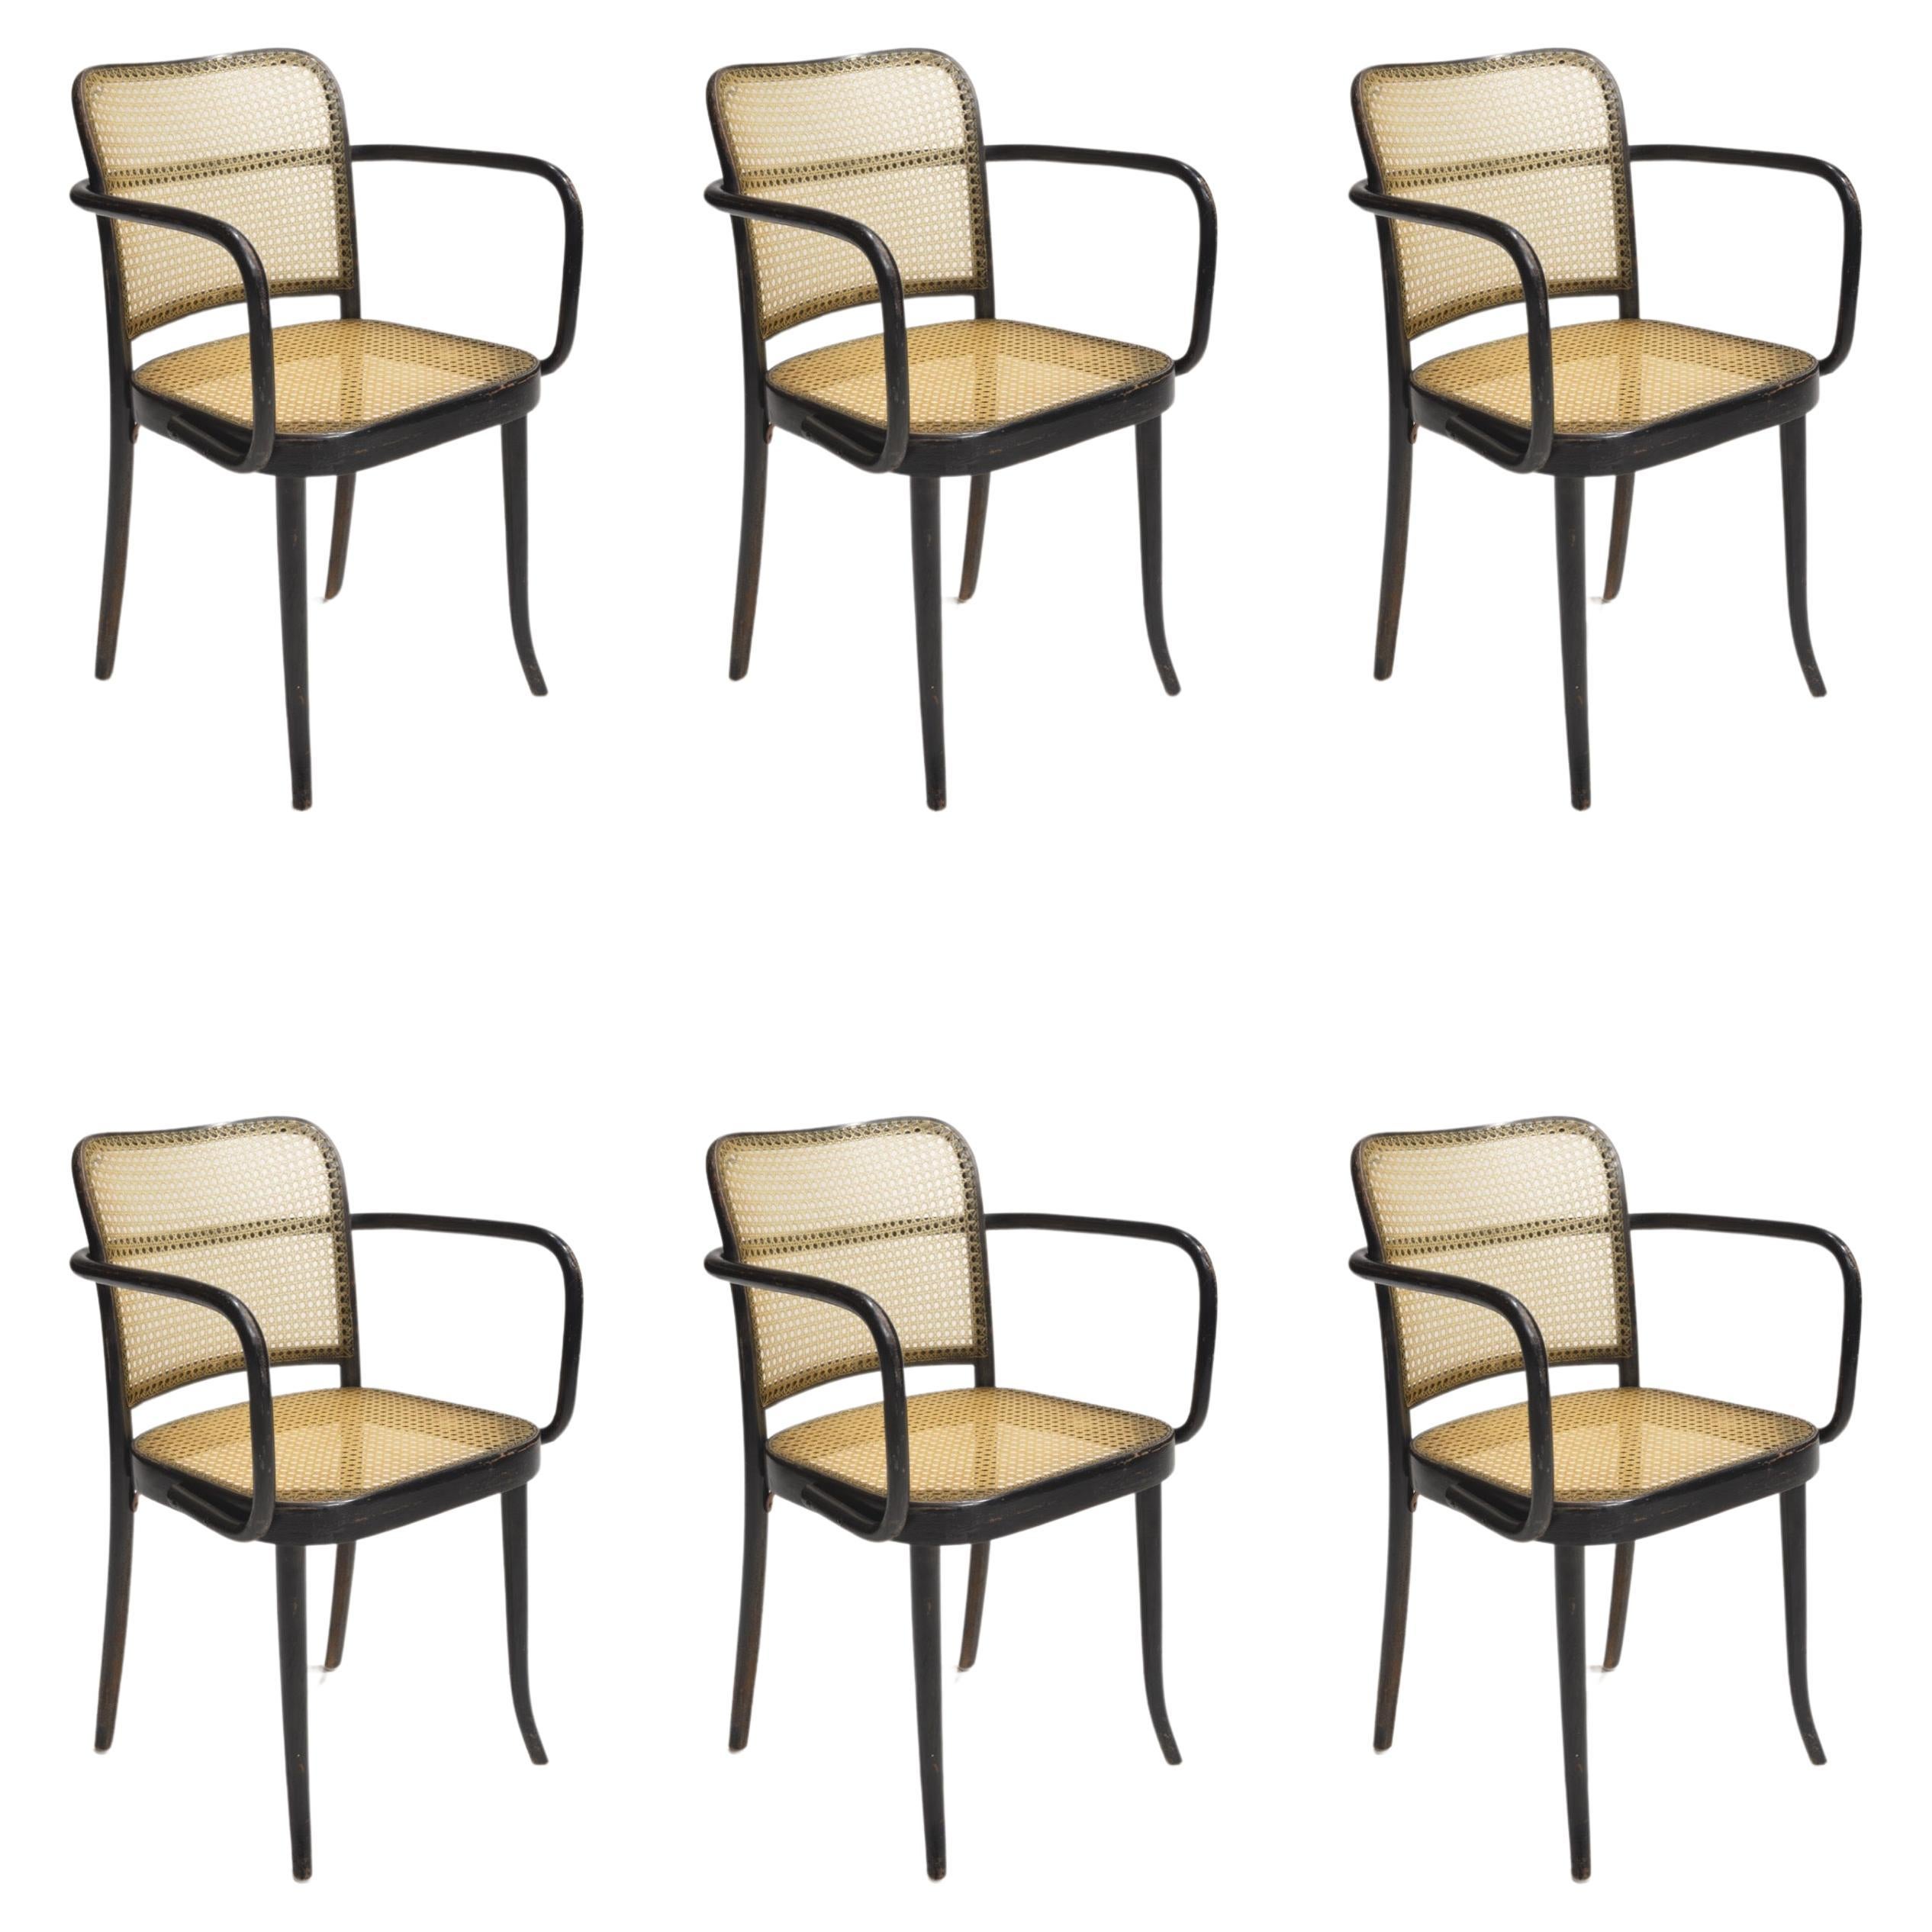 Josef Hoffmann Bentwood Beech Prague Model 811 Chairs in Black and Leather Weave